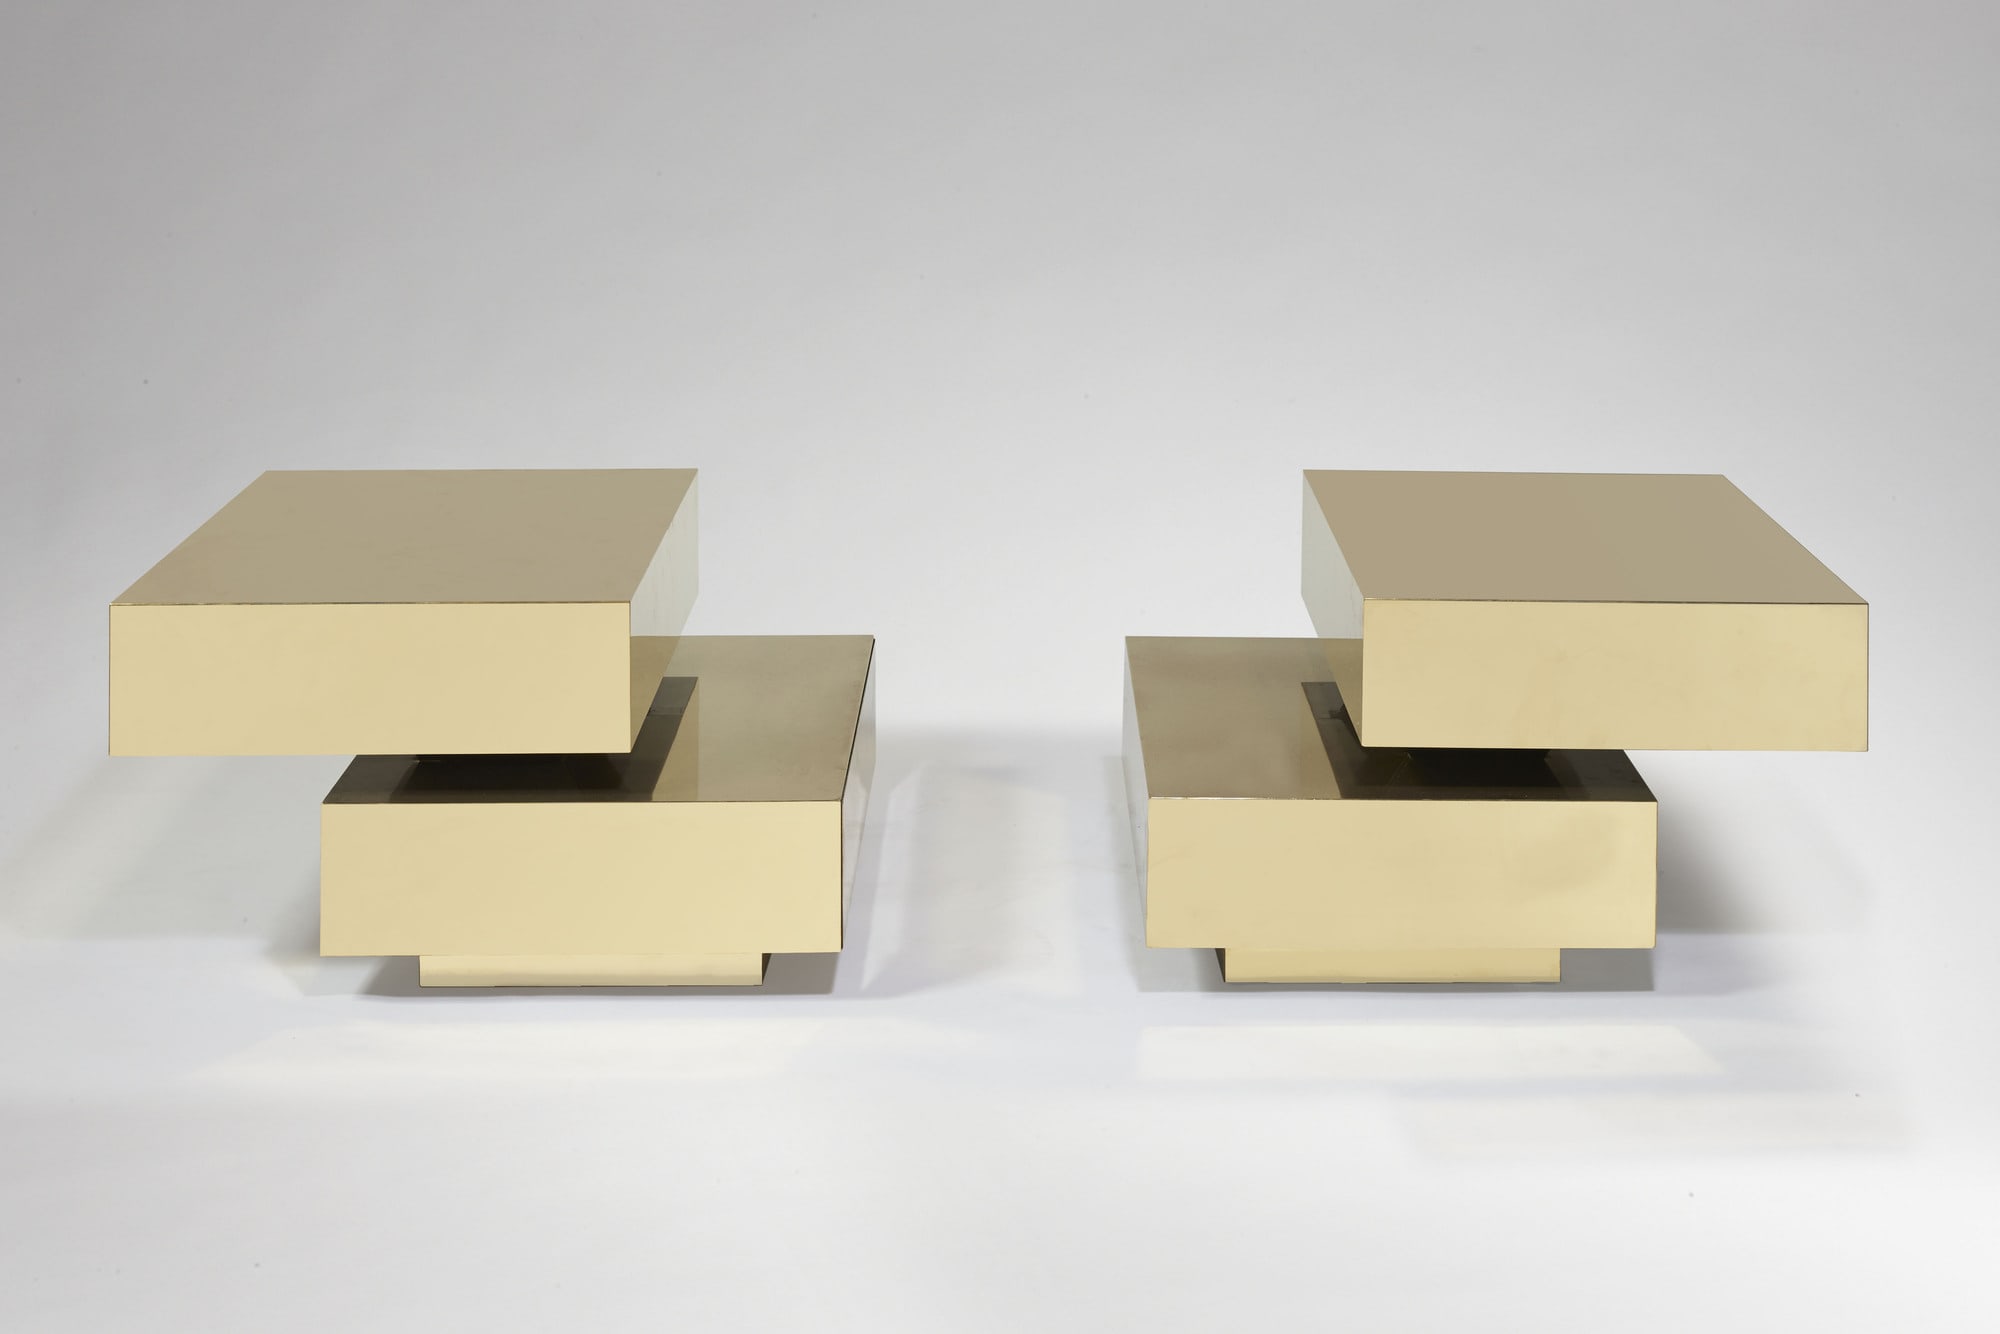 Pair of “Scultura” coffee table, vue 01